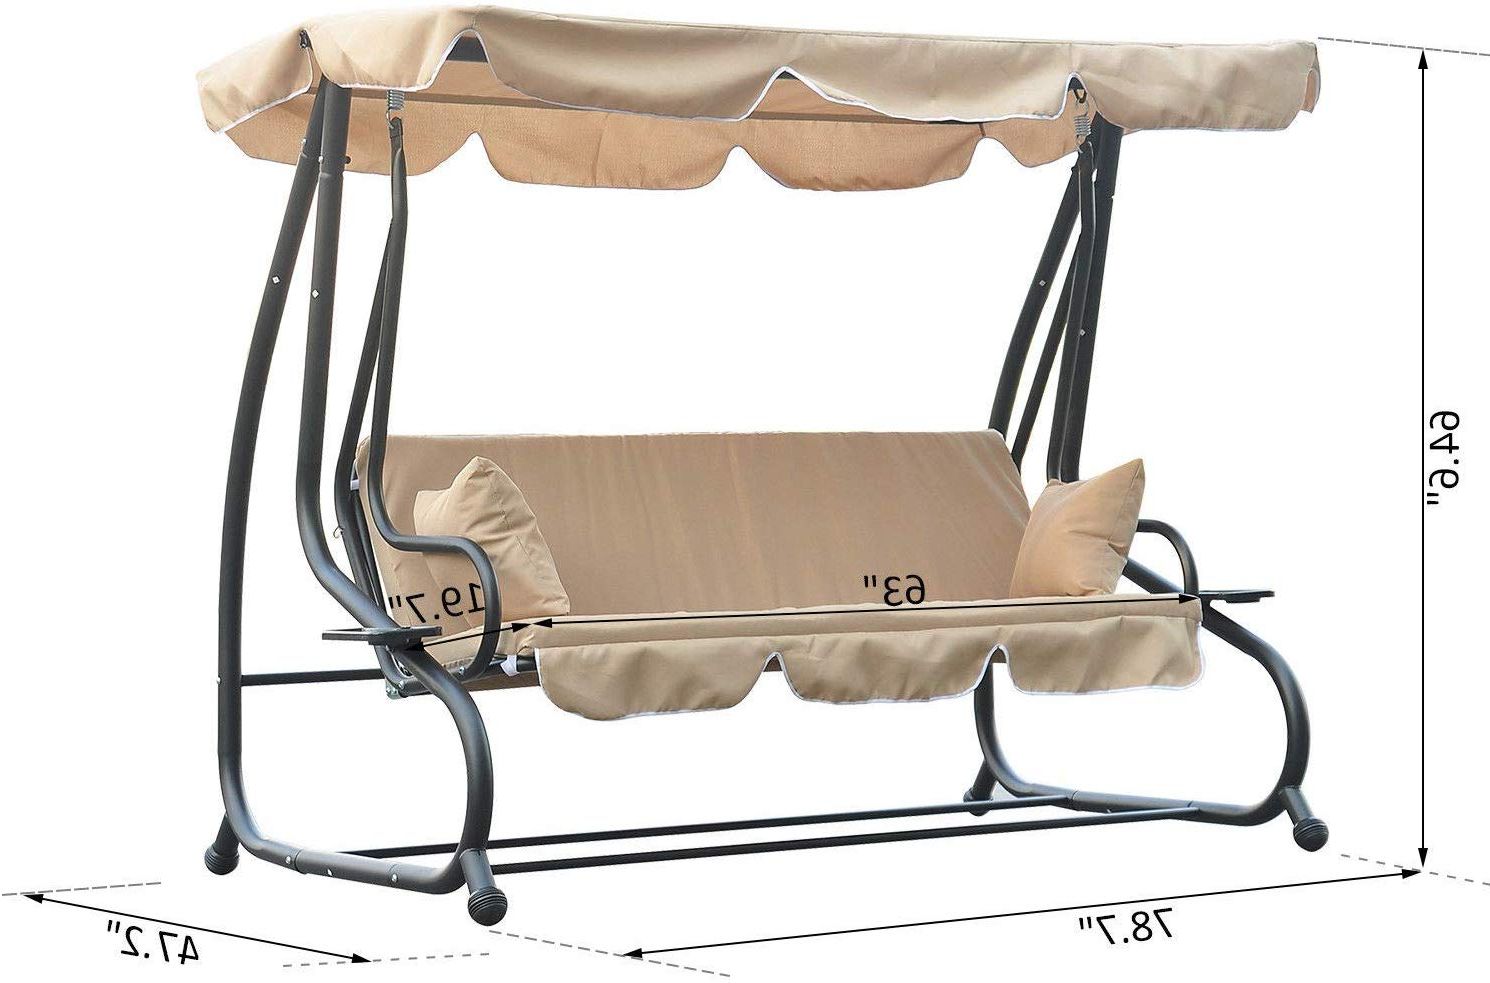 Amazon : Allblessings Patio 3 Seated Porch Swing Hammock Pertaining To Most Recent Patio Loveseat Canopy Hammock Porch Swings With Stand (Photo 1 of 30)